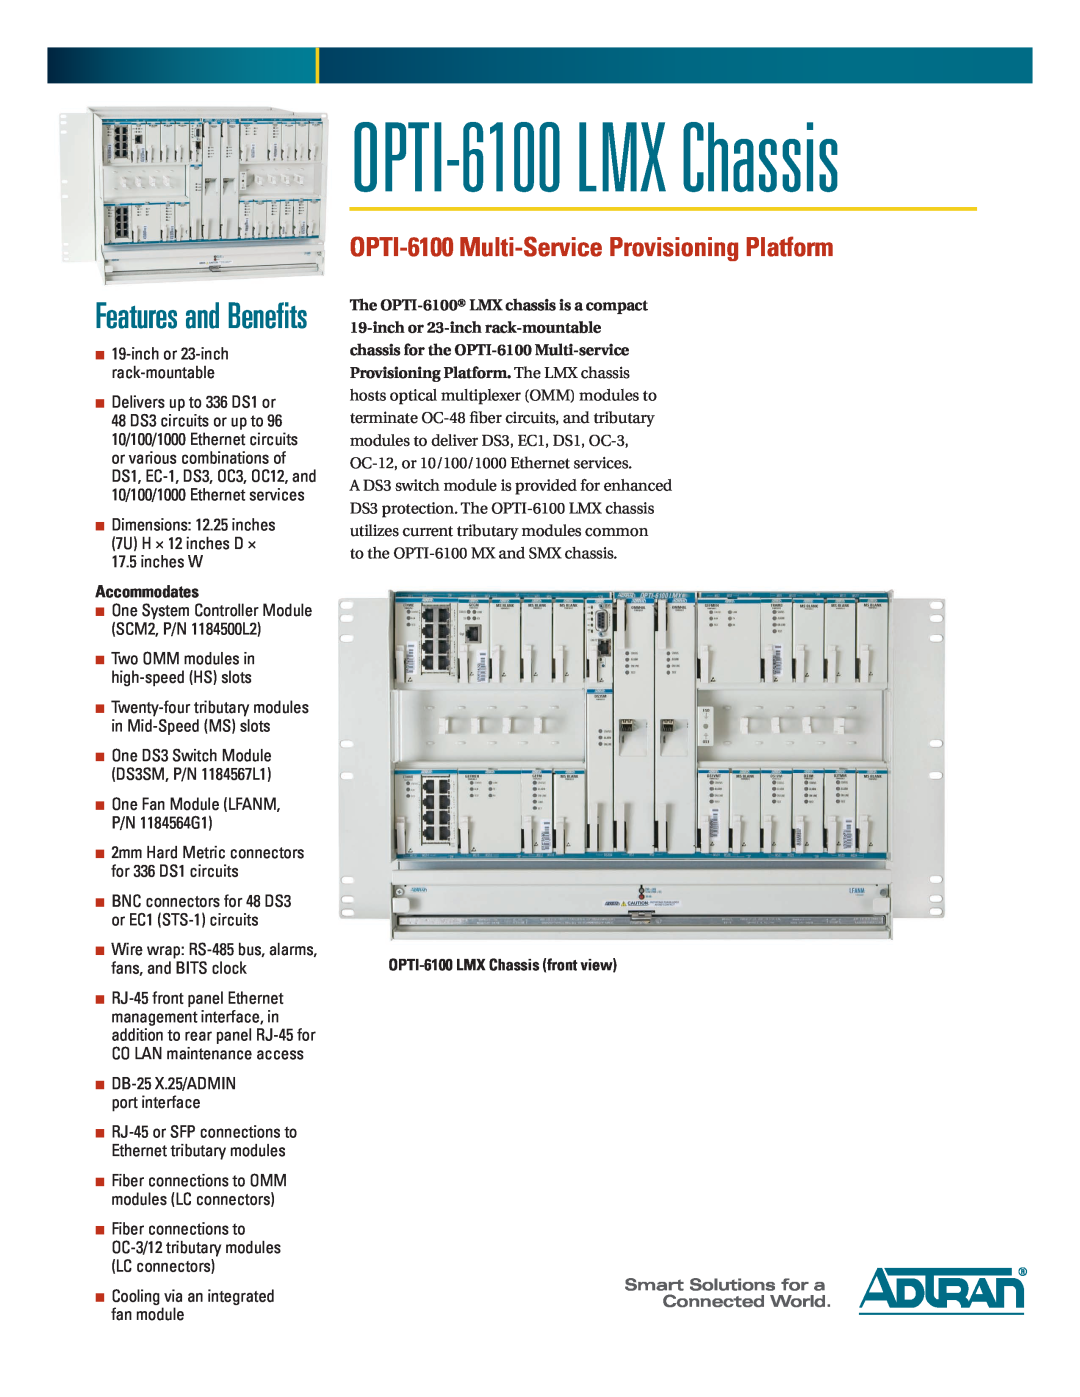 ADTRAN dimensions OPTI-6100 LMX Chassis front view, OPTI-6100 Multi-Service Provisioning Platform, Accommodates 